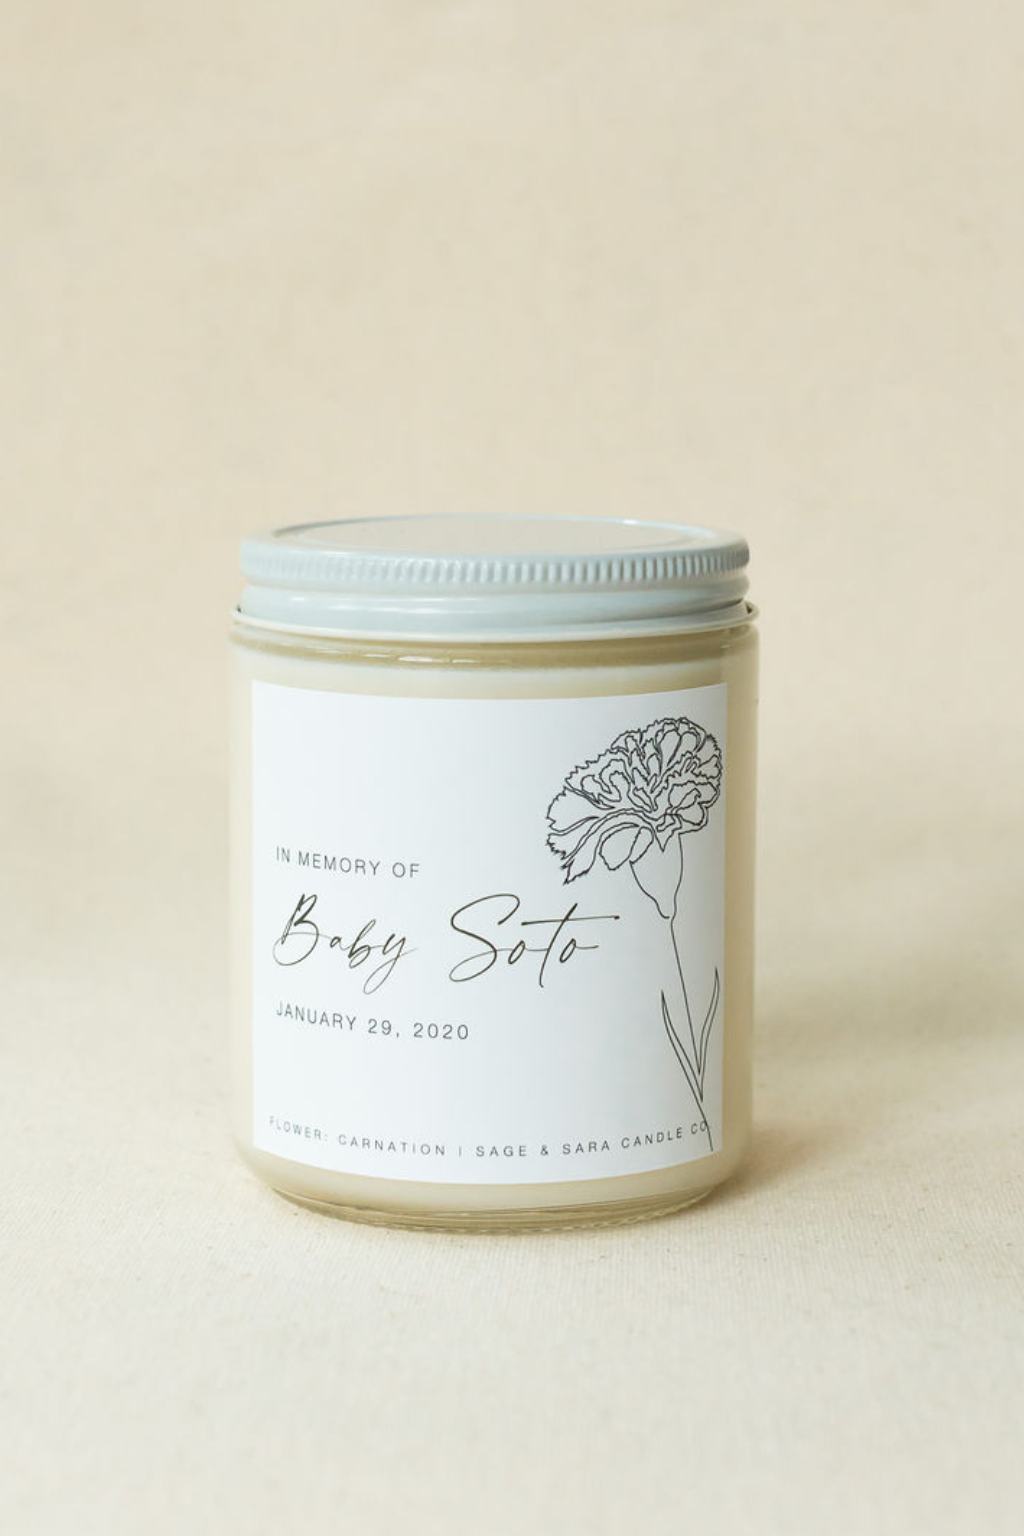 Custom Label - Soy Wax Candle – Sandy Paws Candles